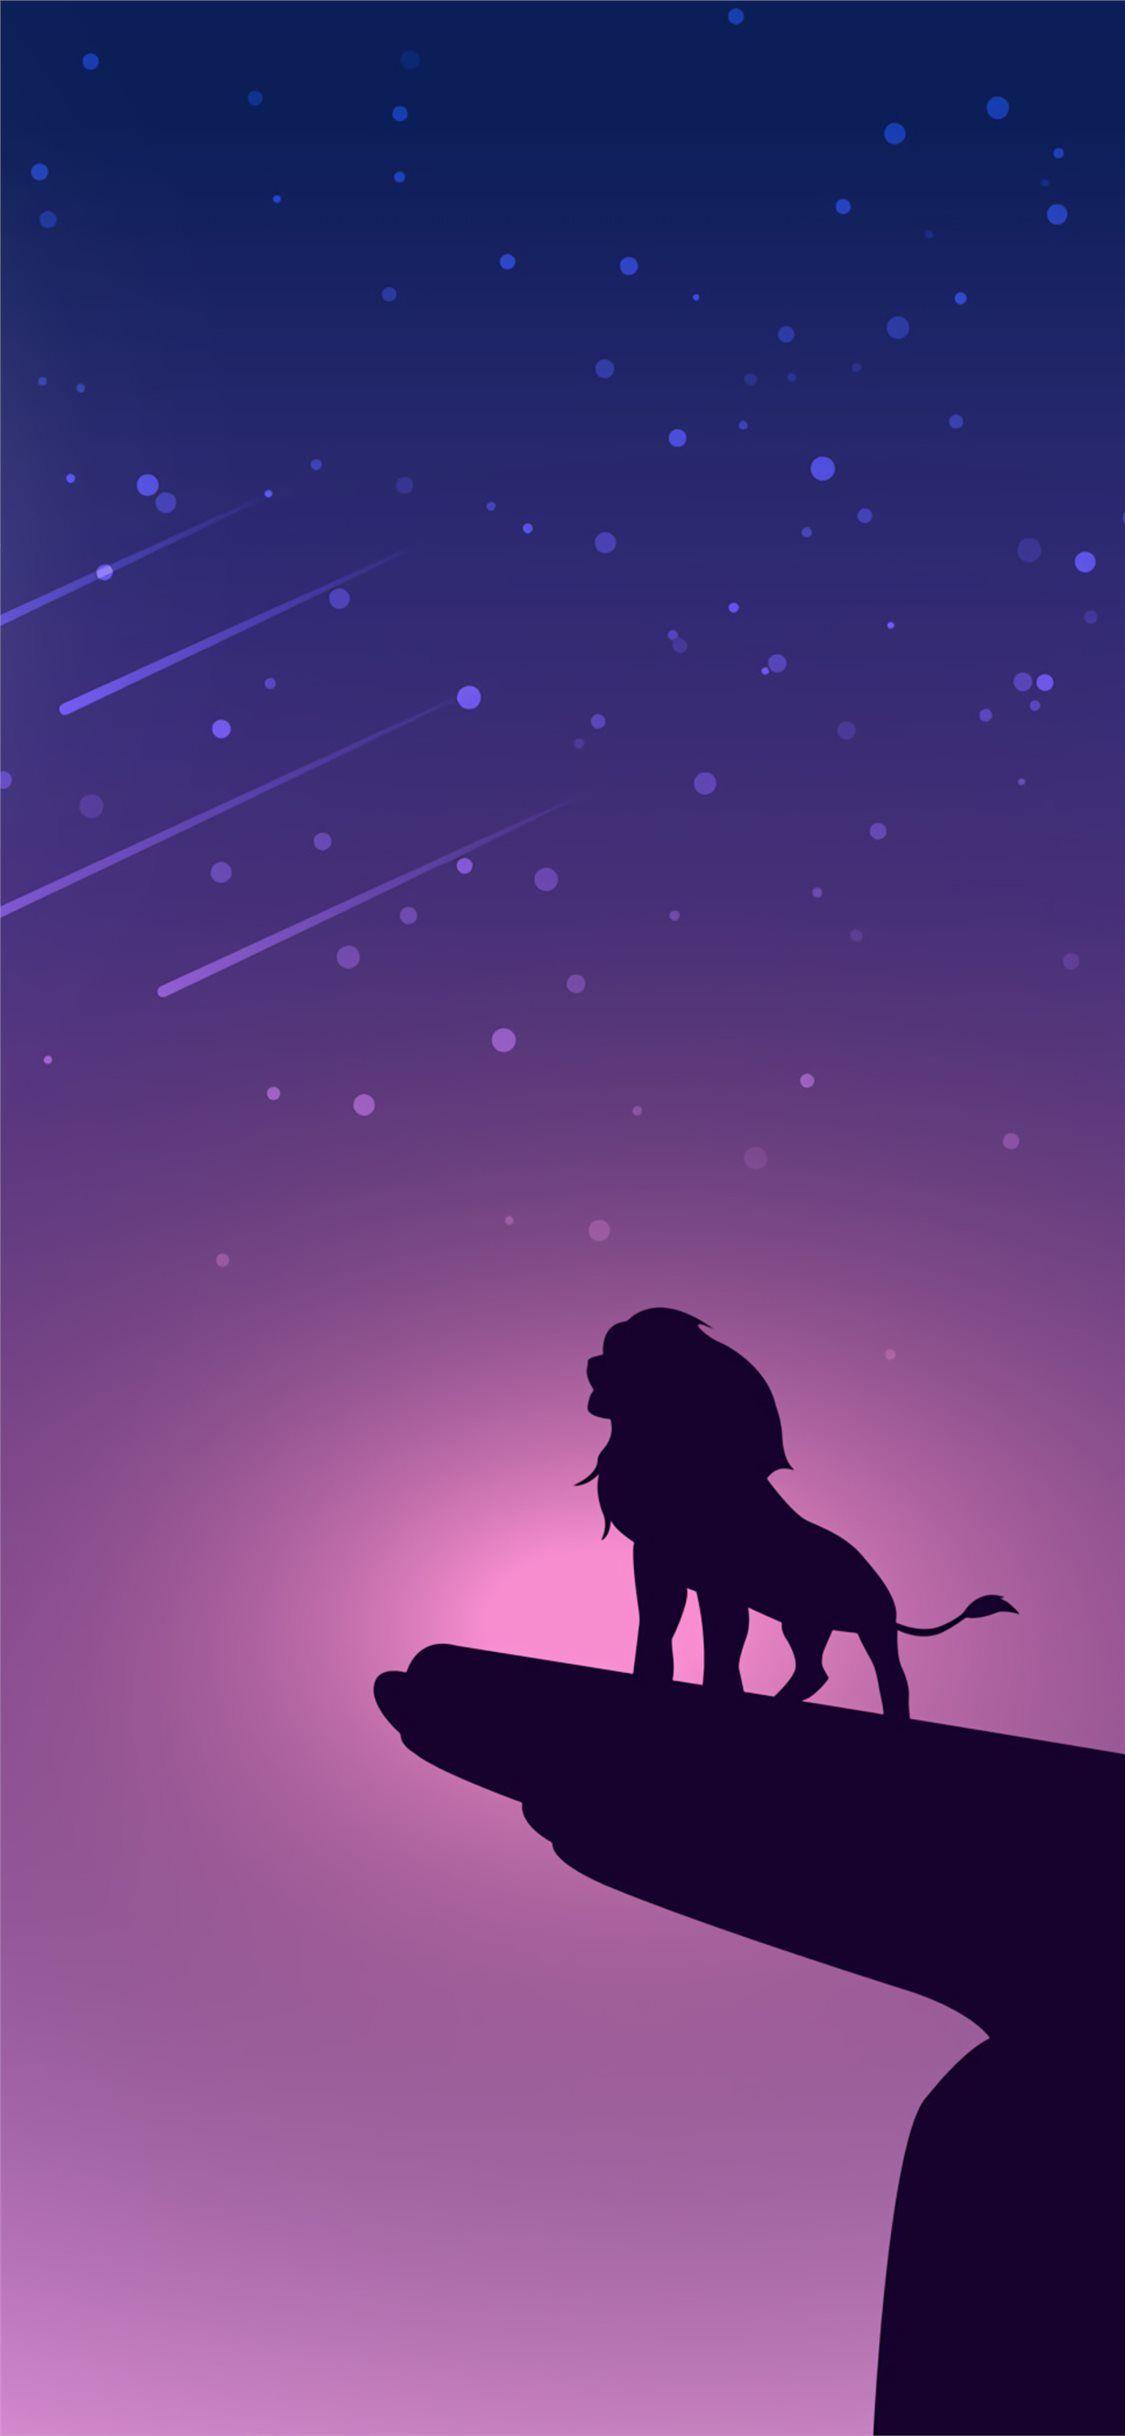 Details more than 76 simba wallpaper latest